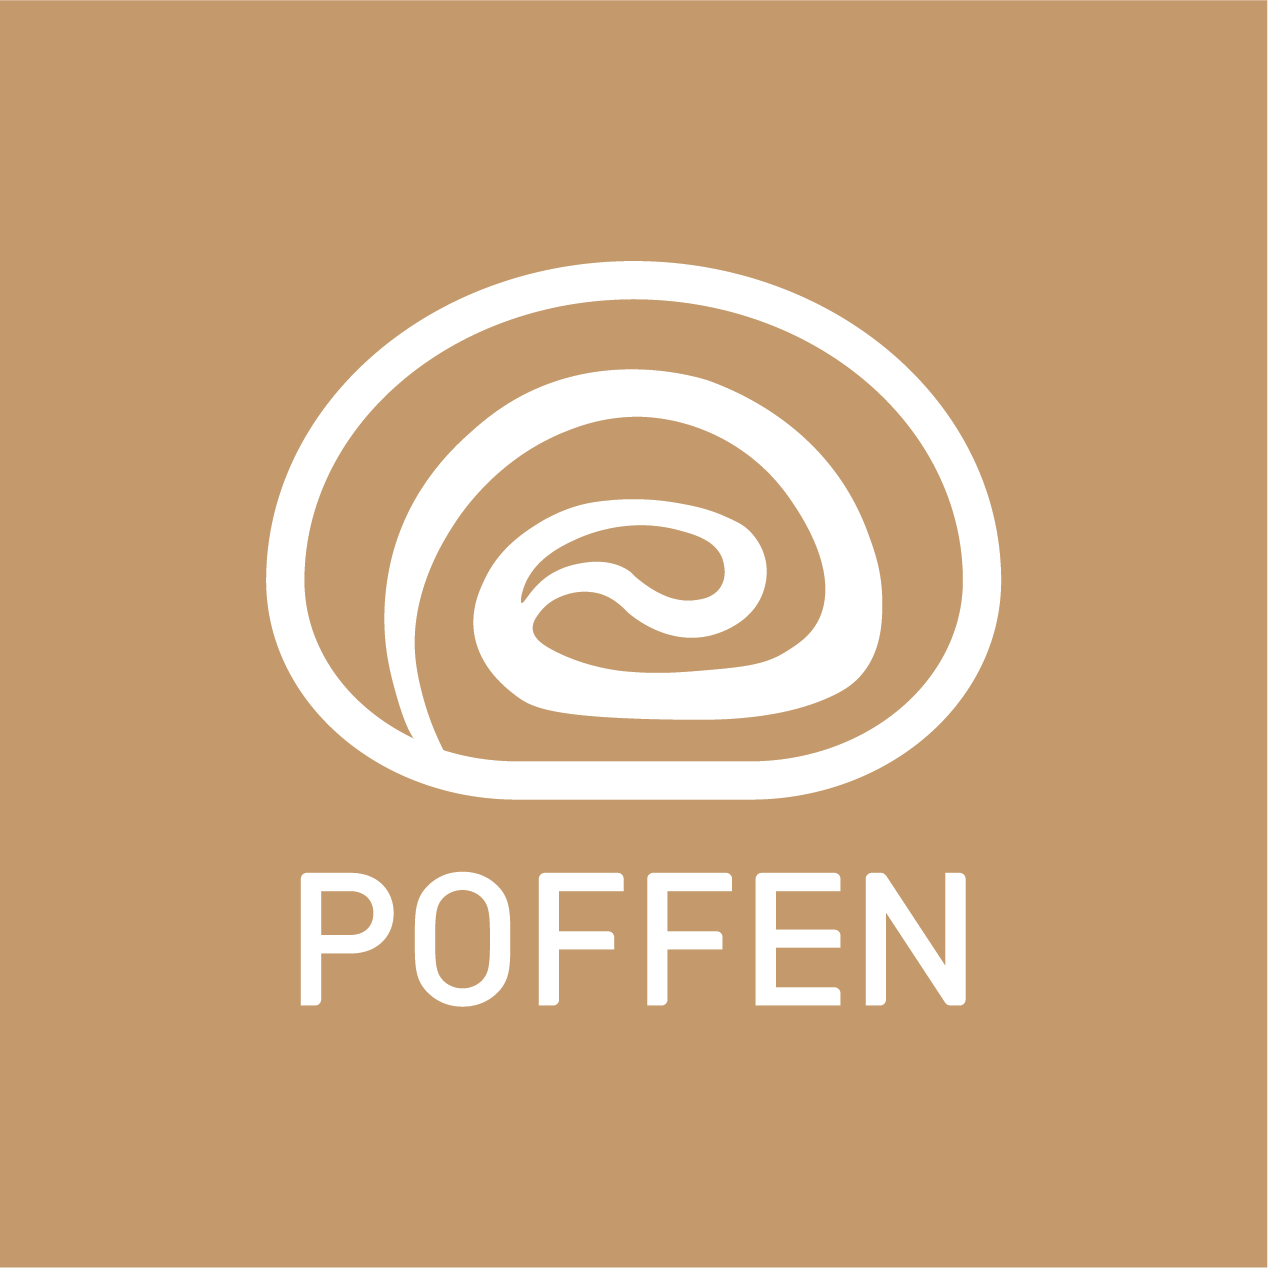 Poffen Snack and Bakery